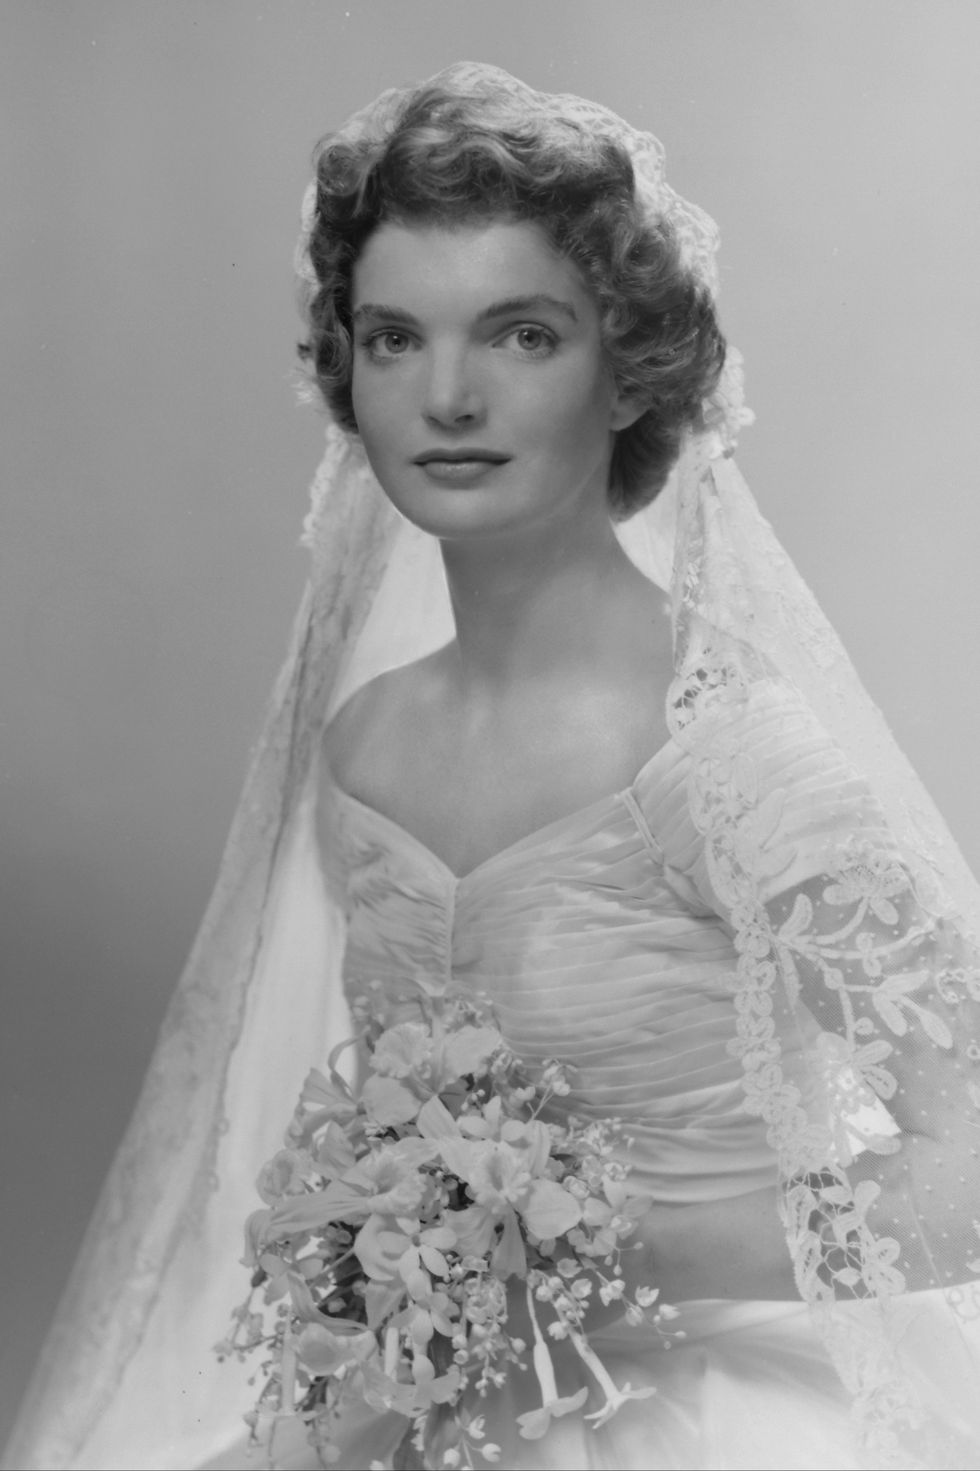 bridal portrait of jacqueline lee bouvier 1929   1994 shows her in an anne lowe designed wedding dress, a bouquet of flowers in her hands, new york, new york, 1953 photo by bachrachgetty images